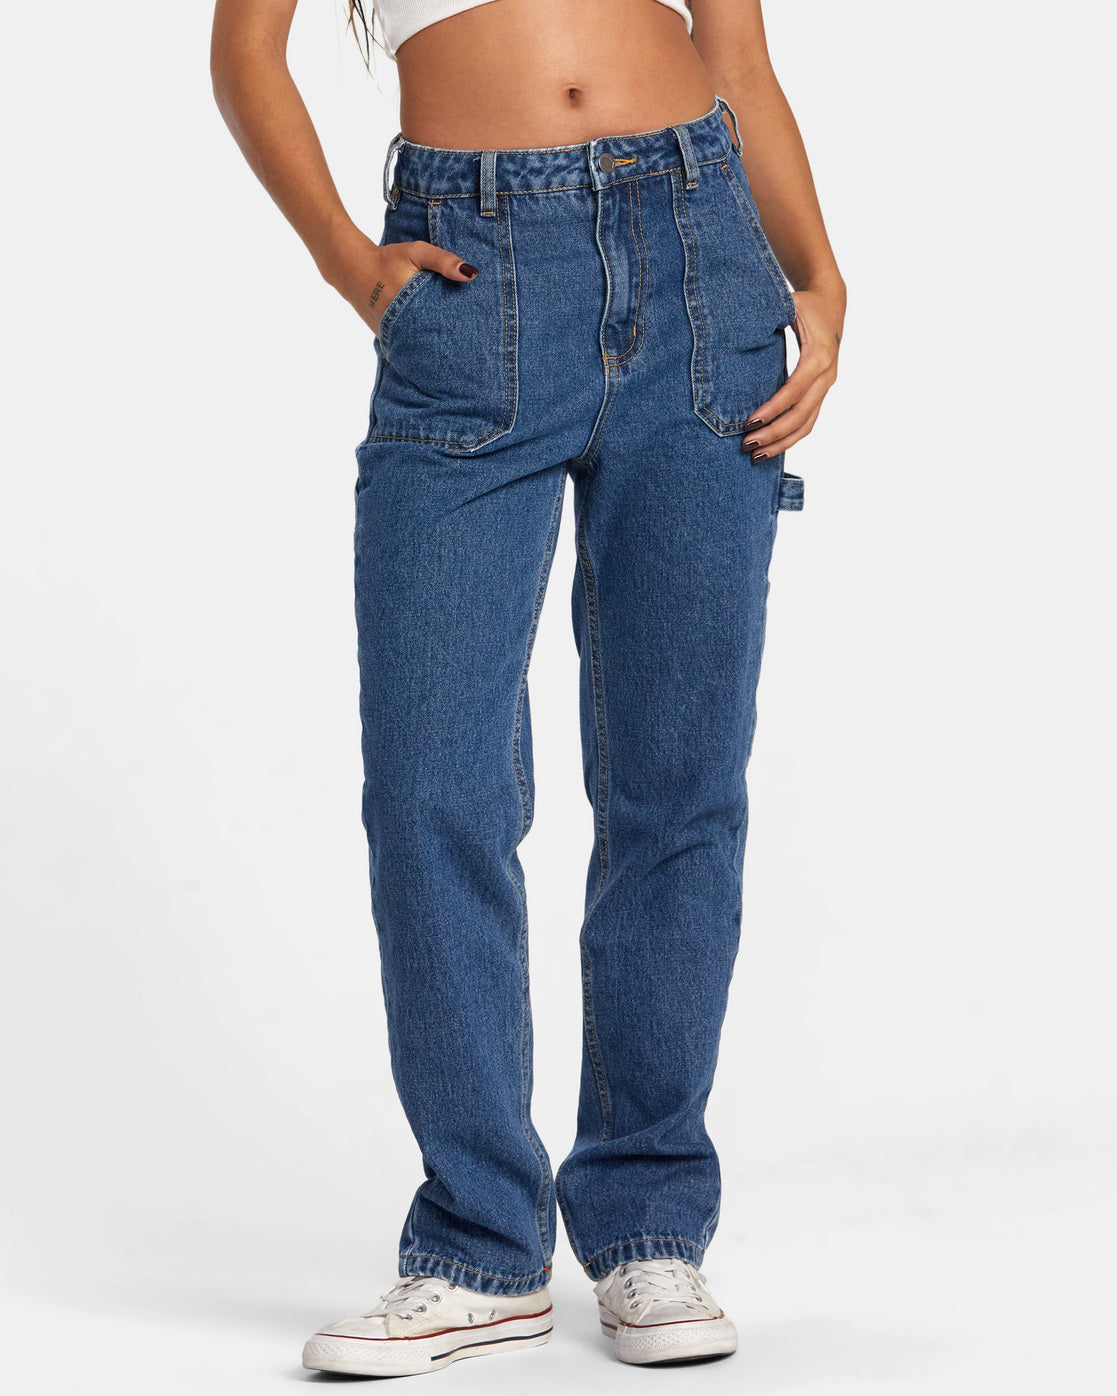 Are these guess jeans womens? I thought they might be from the 90s or early  2k. What do you think? : r/VintageFashion